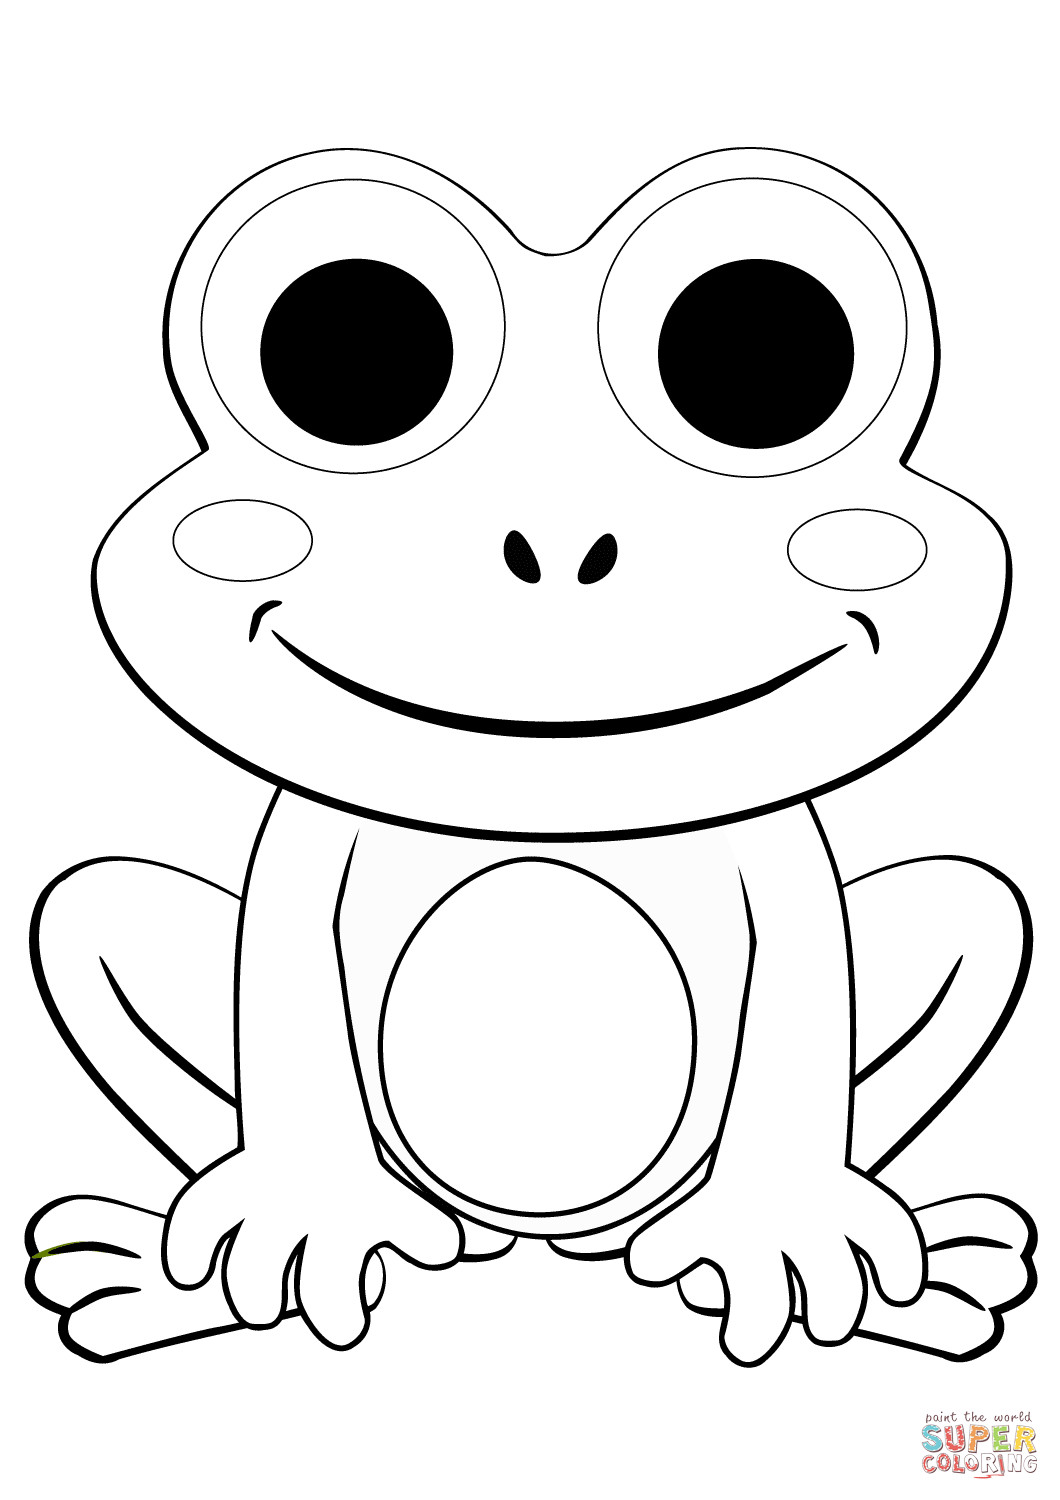 Baby Frog Coloring Pages
 Cute Cartoon Frog coloring page